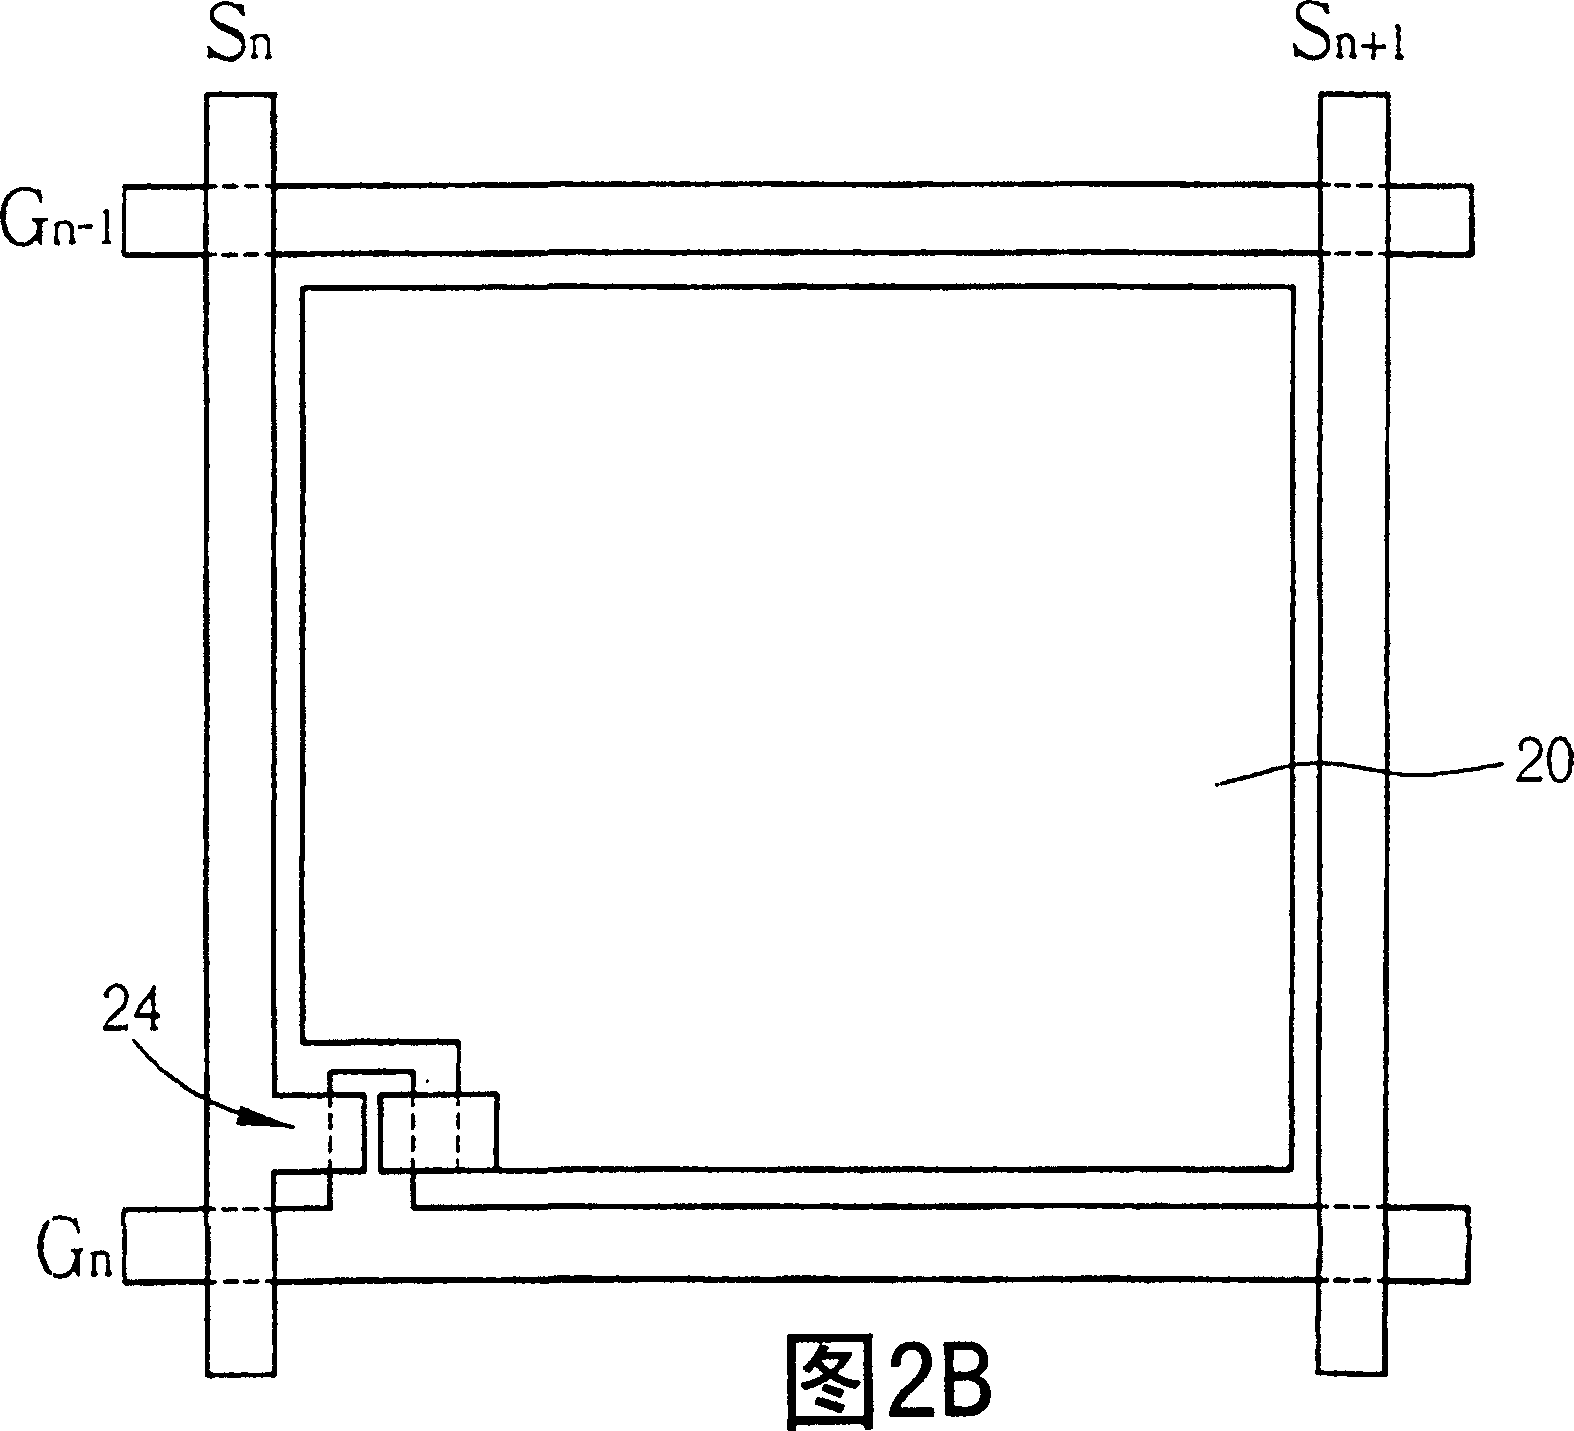 Liquid crystal display with double-film transister pixel structure